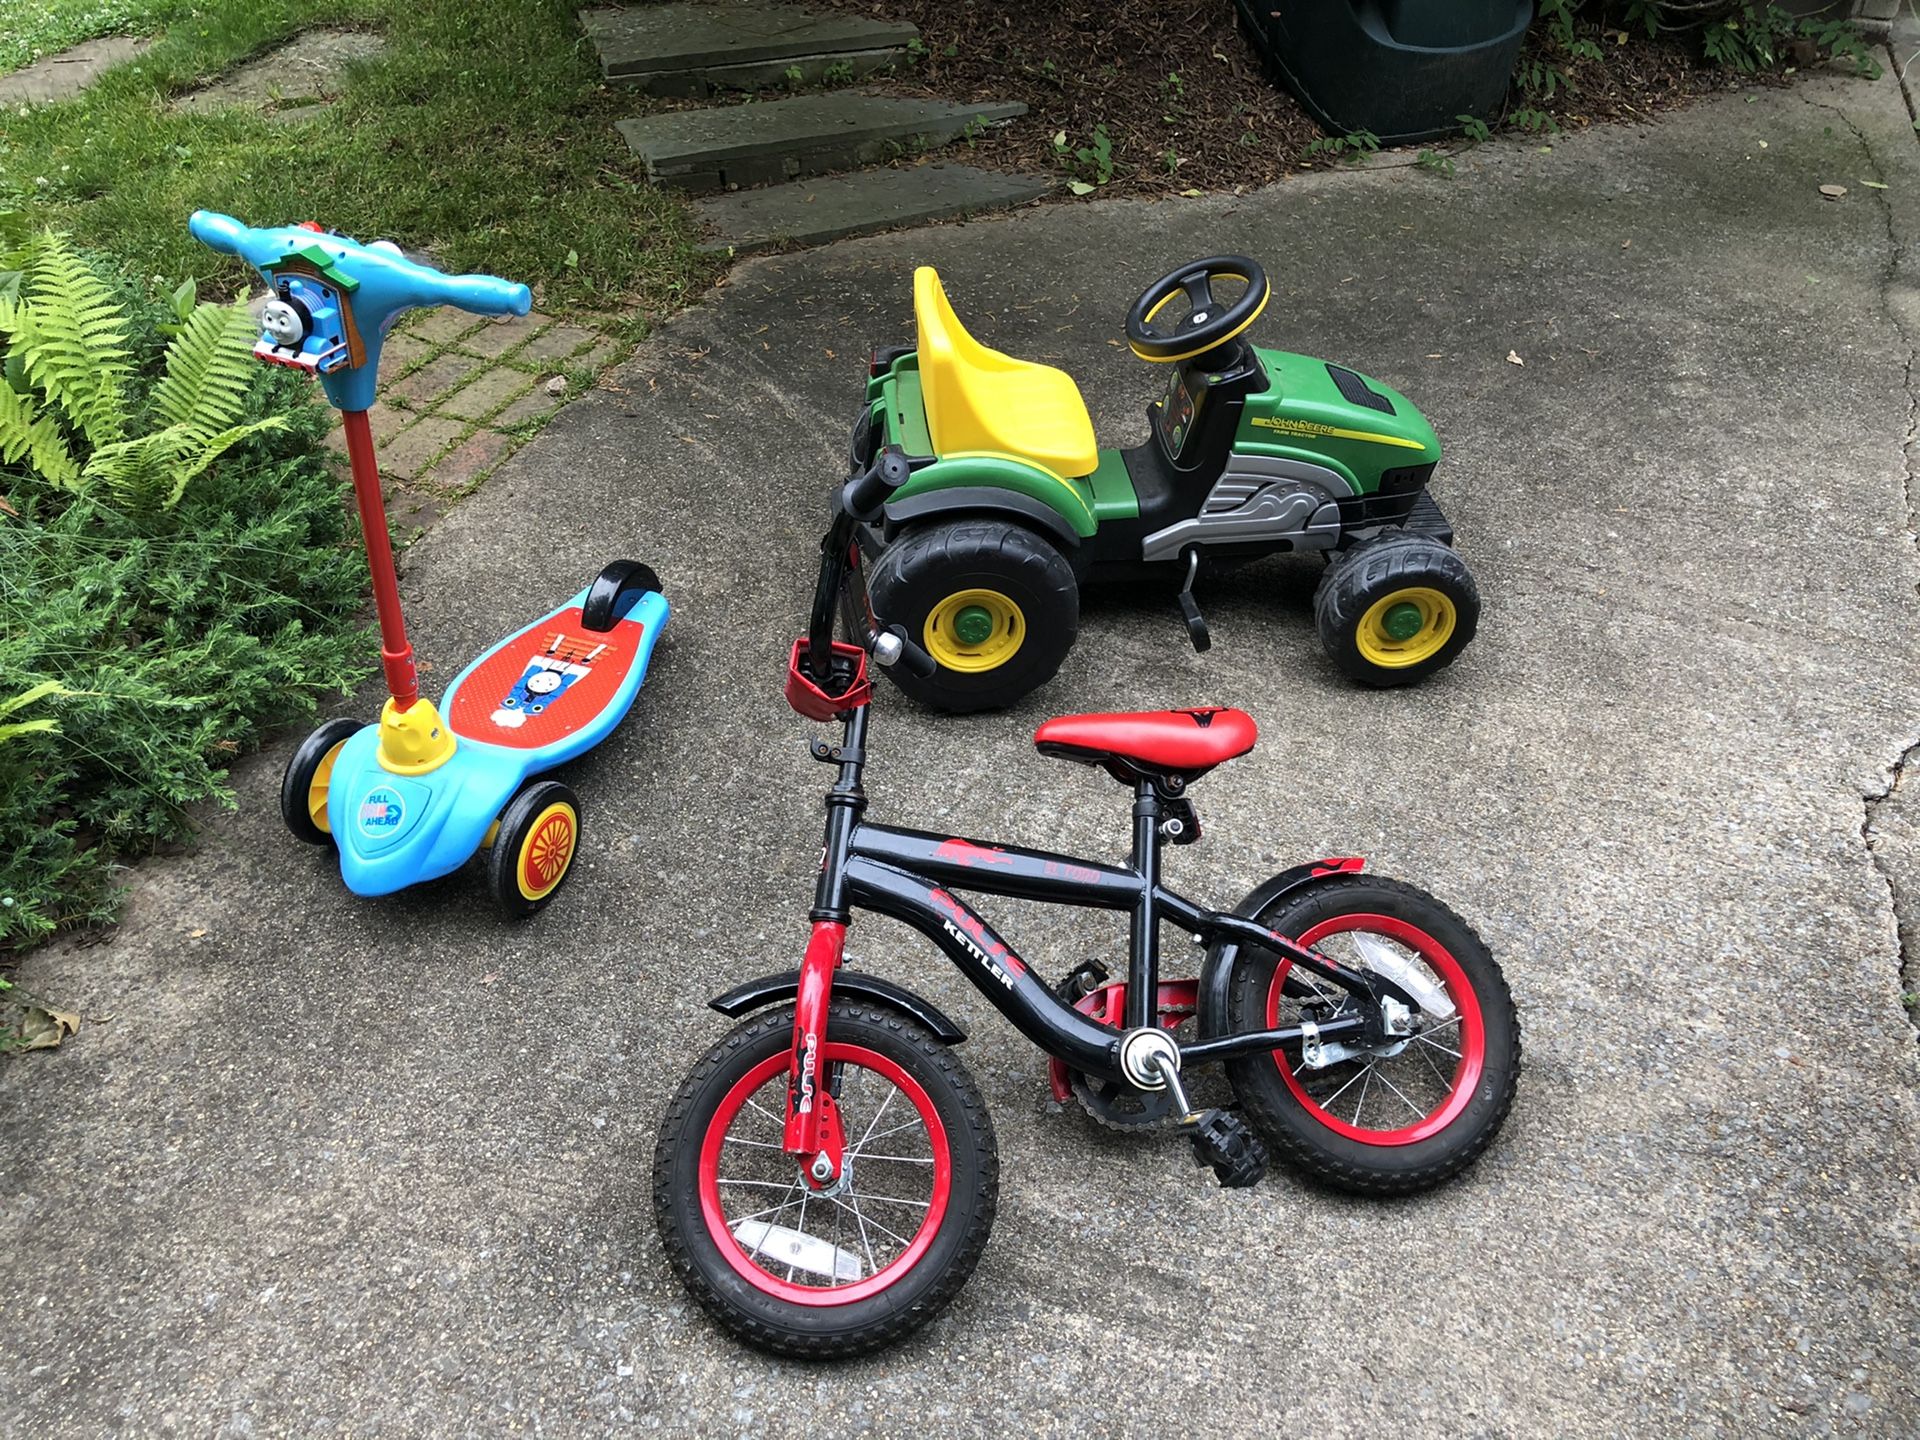 Small kid package: Thomas scooter, John Deere Tractor and beginner’s bicycle